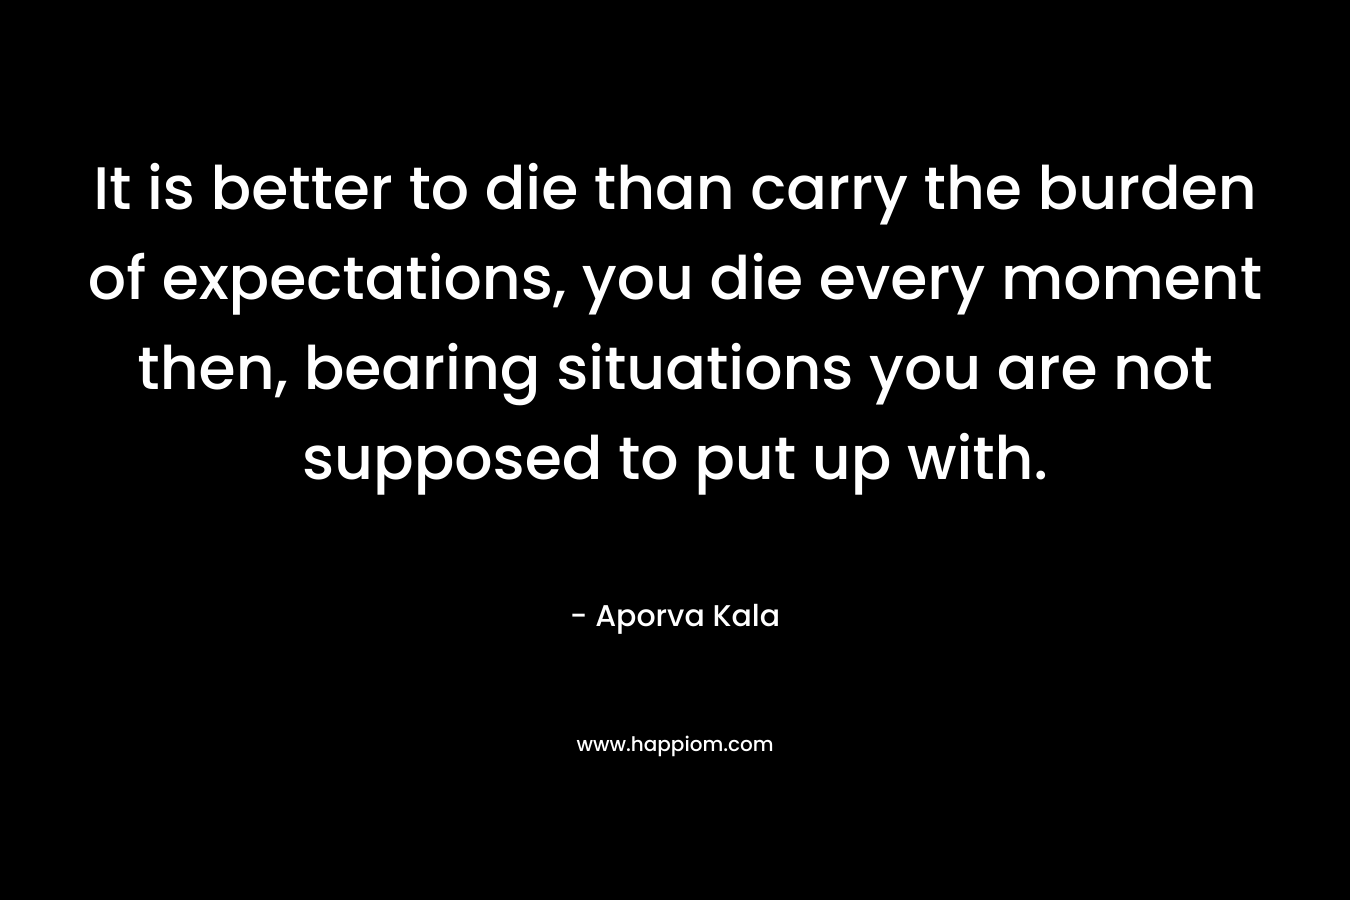 It is better to die than carry the burden of expectations, you die every moment then, bearing situations you are not supposed to put up with.